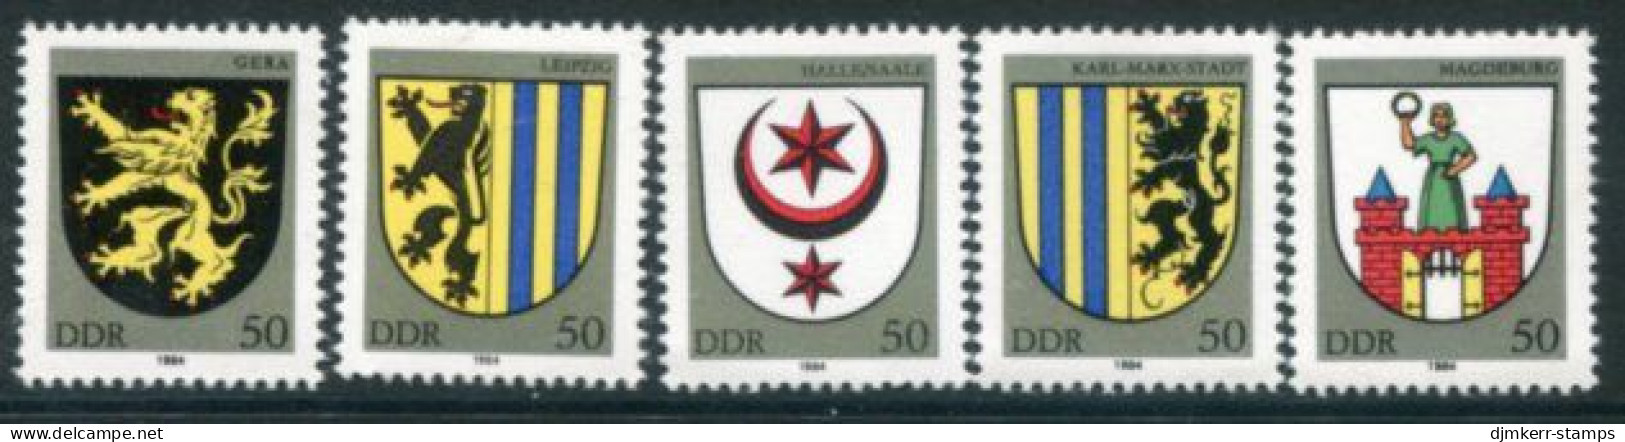 DDR 1984 Town Arms II MNH / **.  Michel 2857-61 - Nuevos